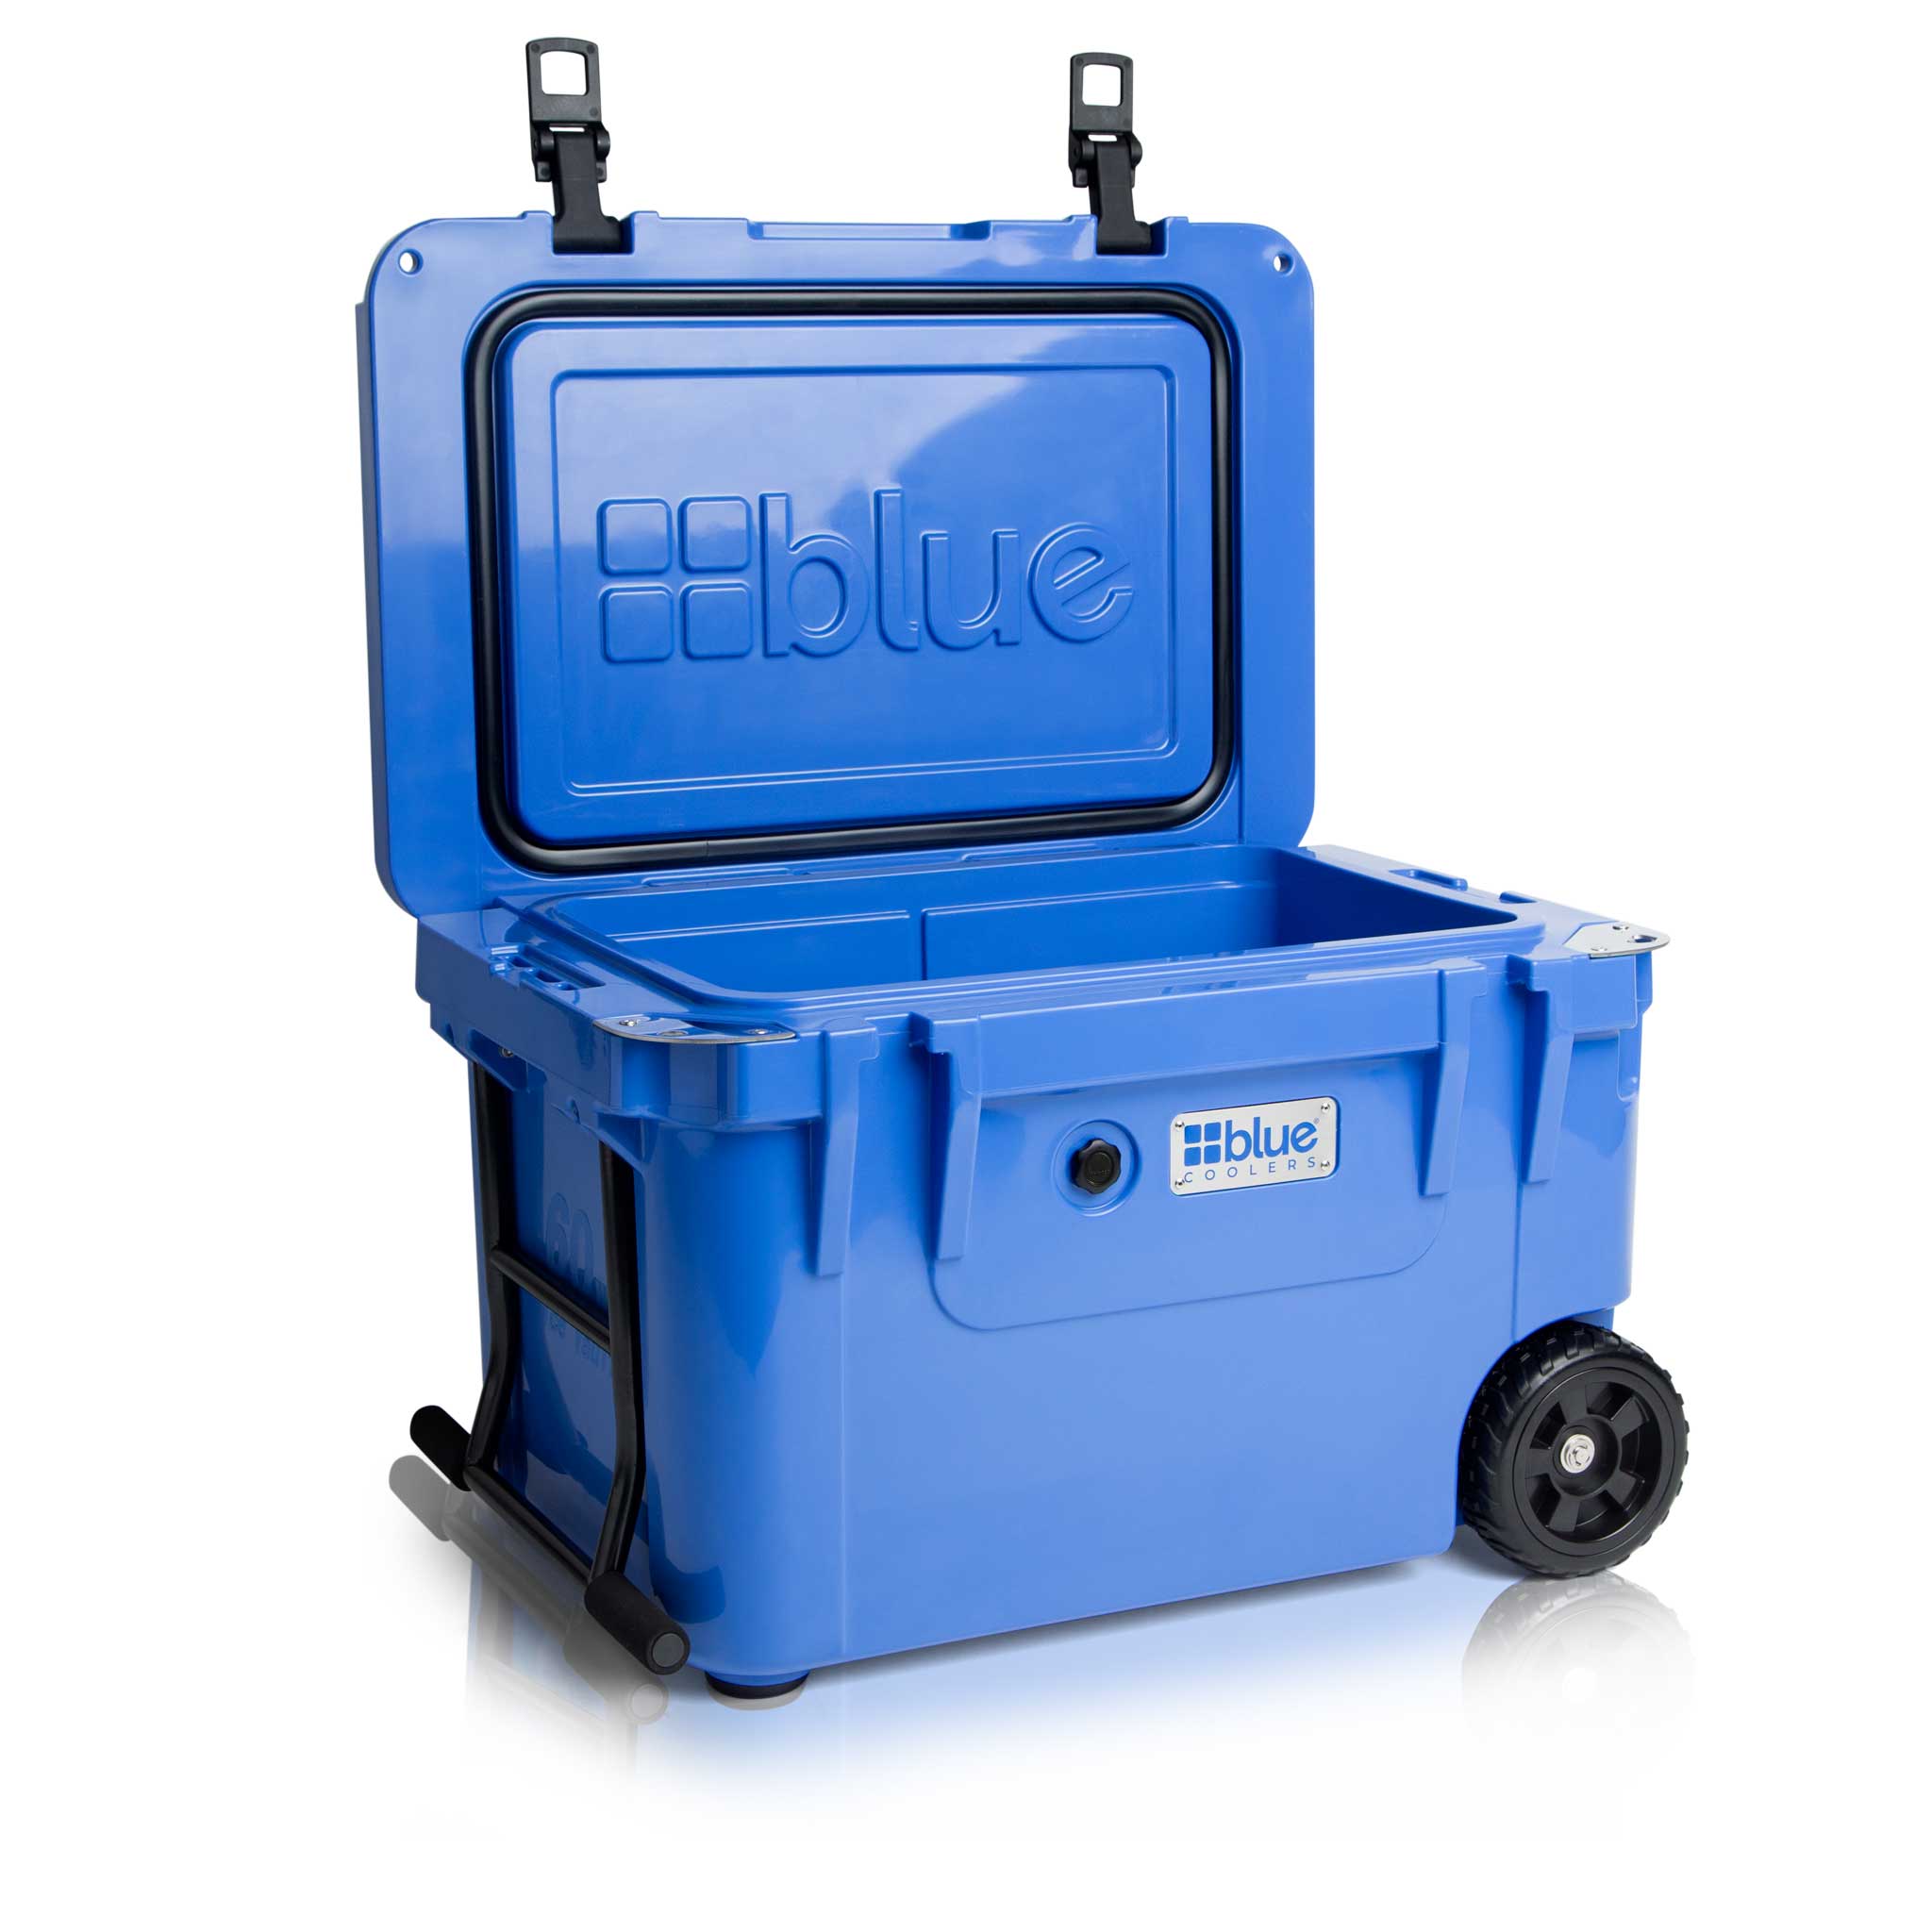 All products – Blue Coolers